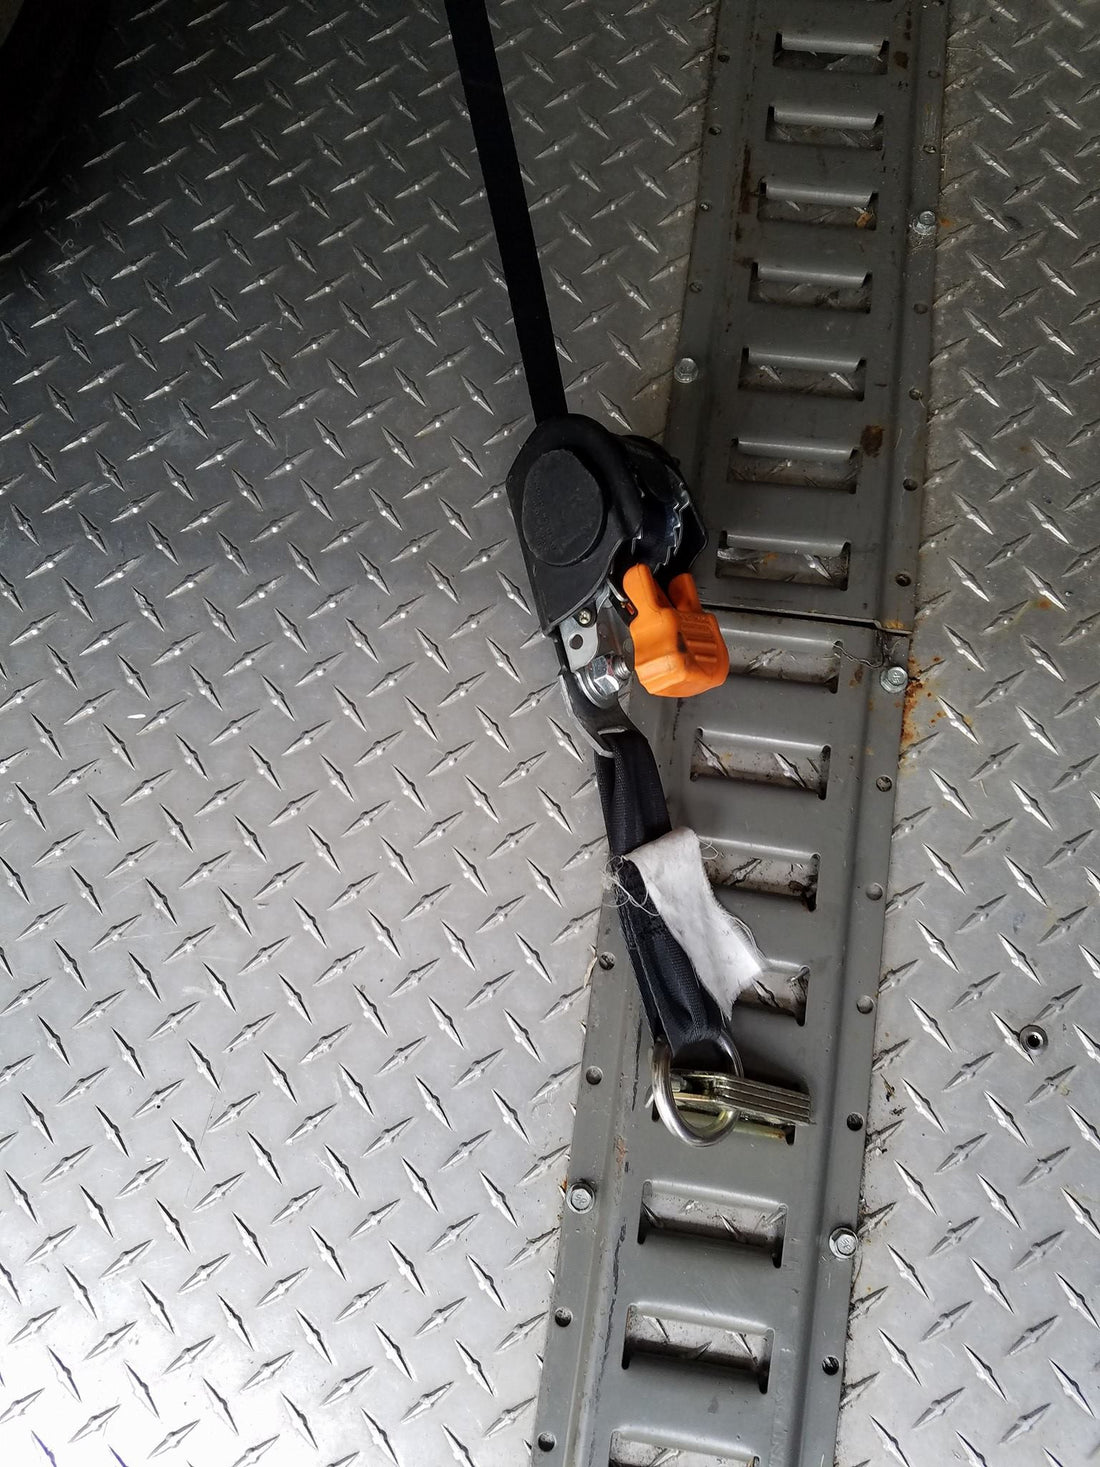 1 inch cargobuckle tie downs with the E-track